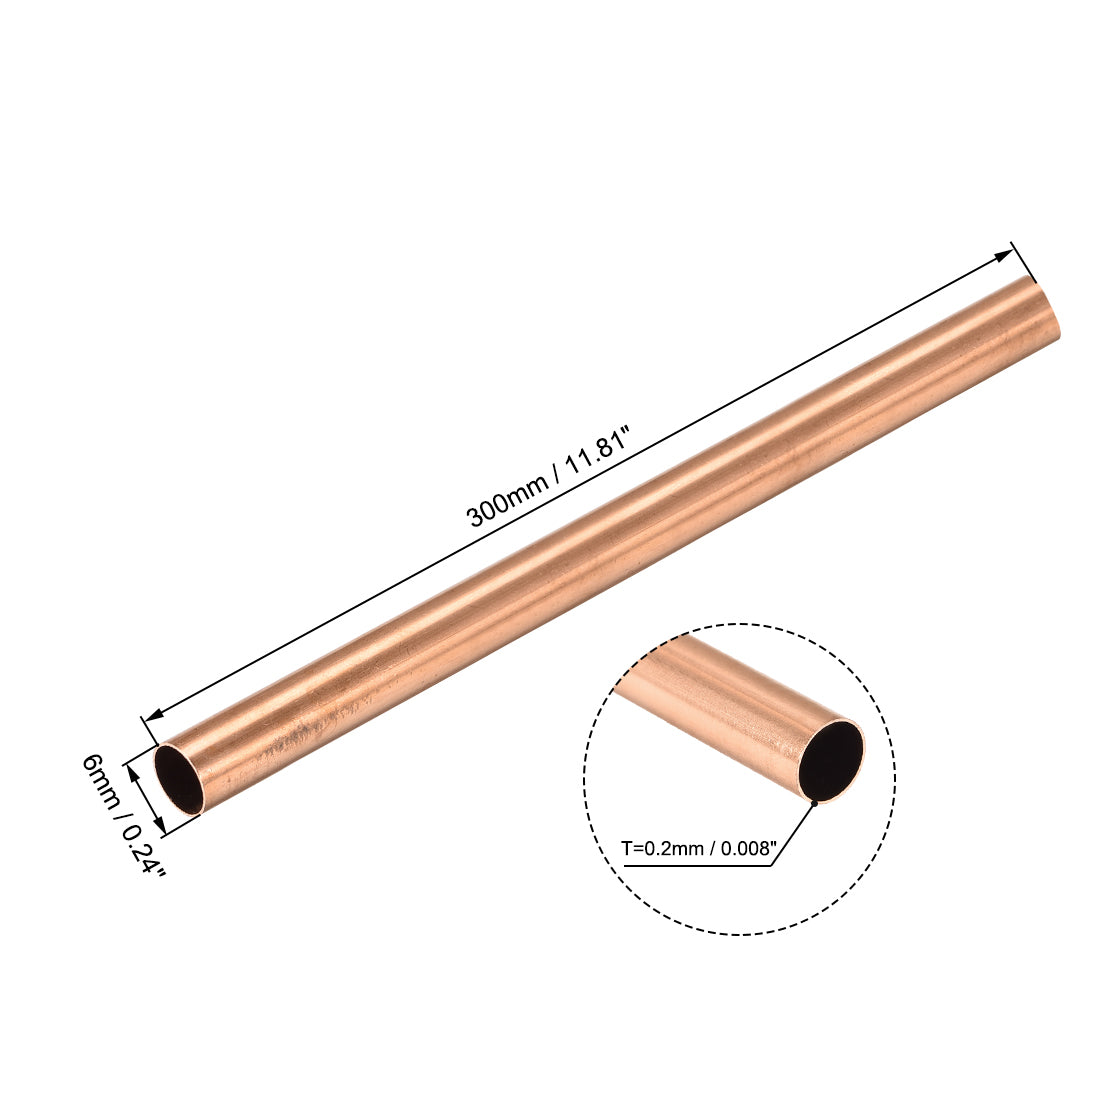 uxcell Uxcell Copper Round Tube Straight Pipe Tubing